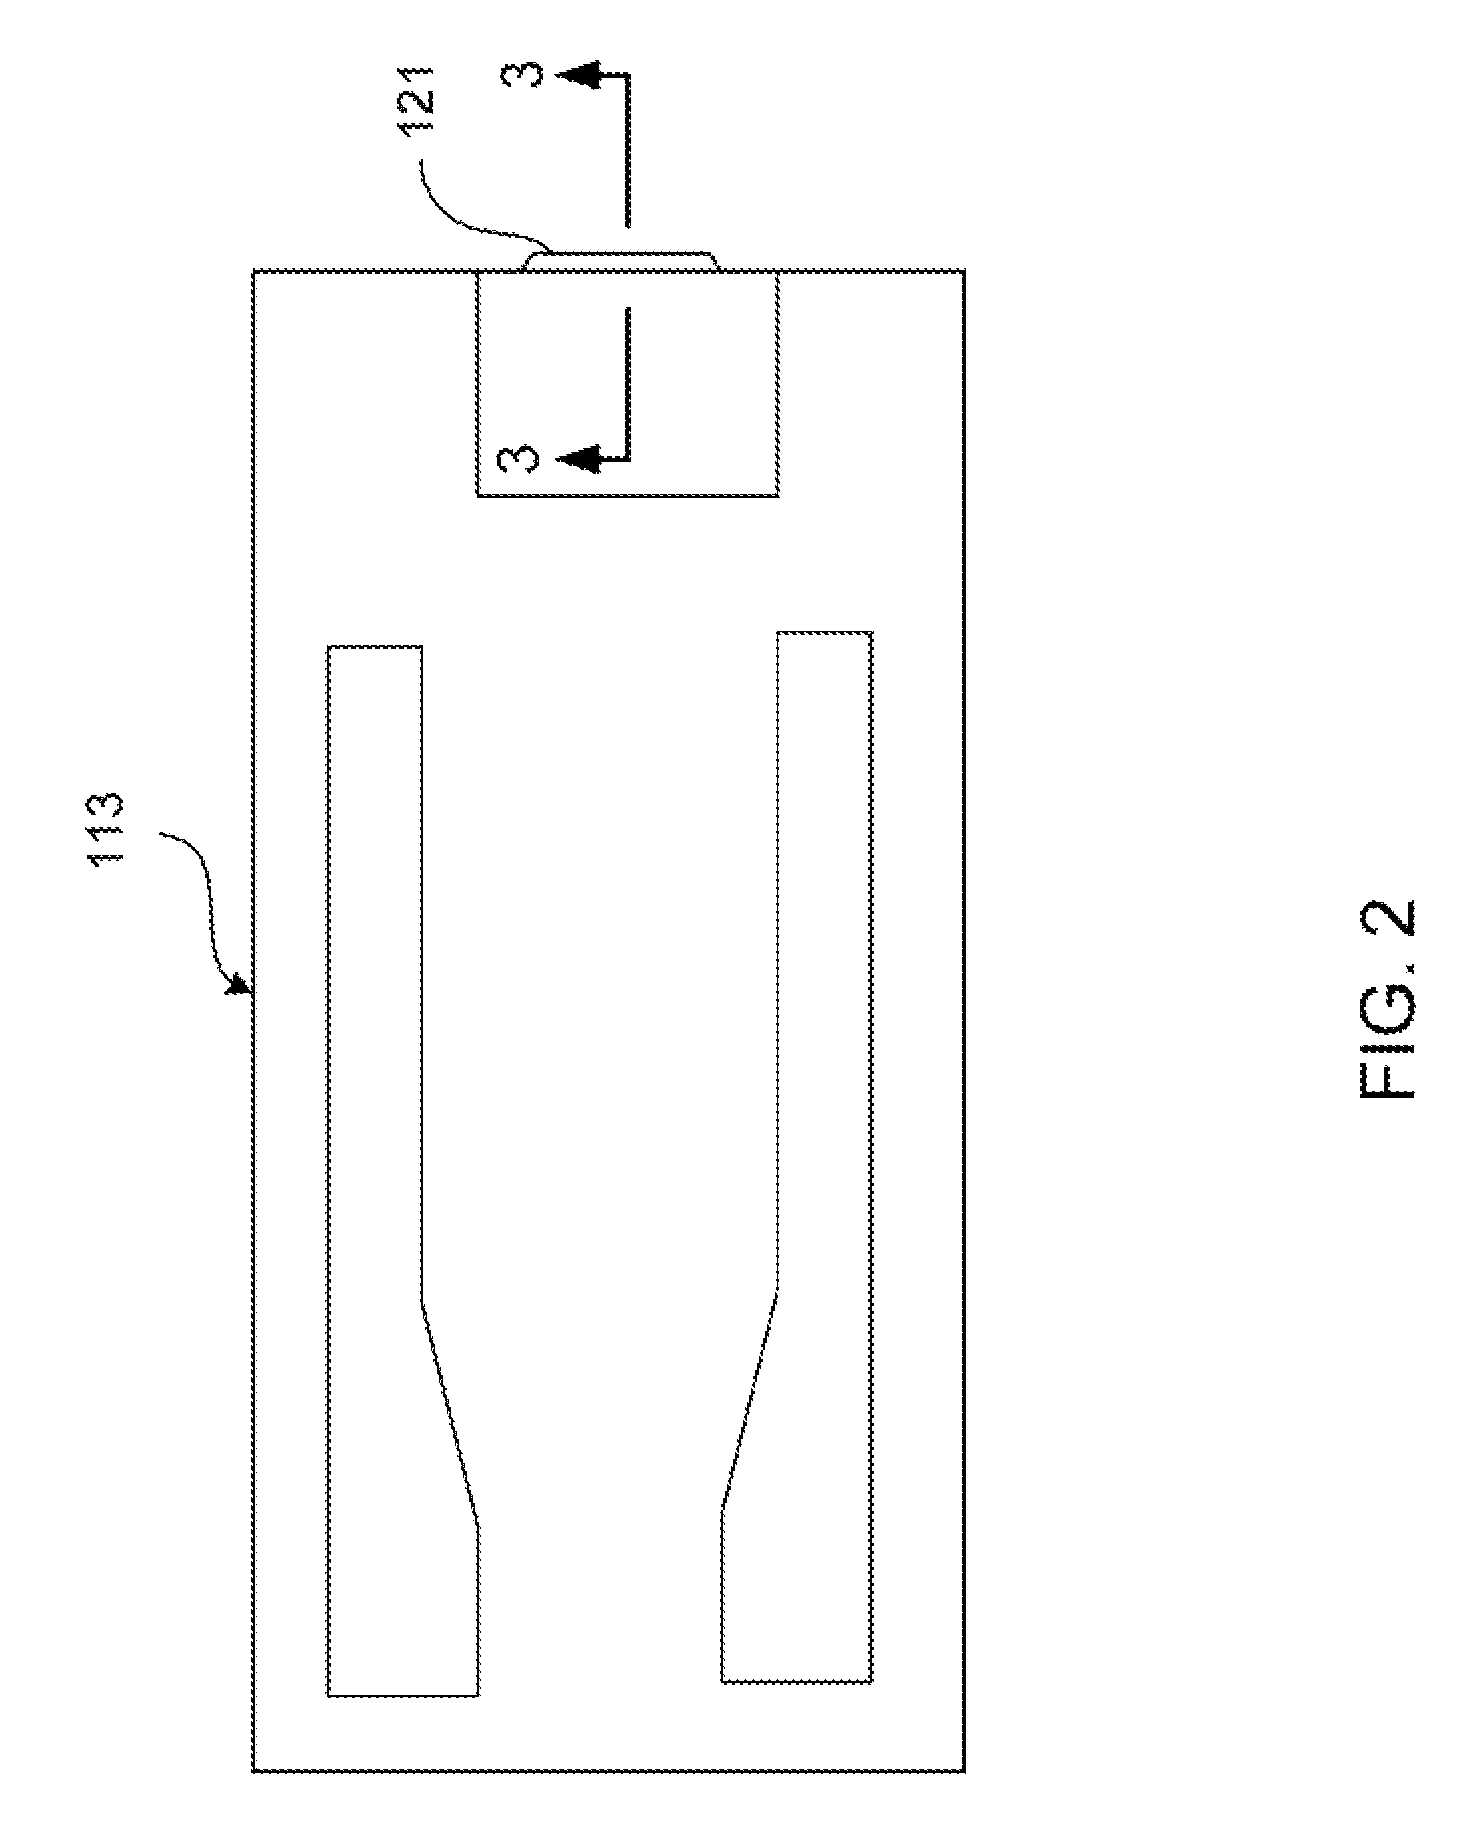 Method of manufacturing a magnetic write head for perpendicular magnetic recording